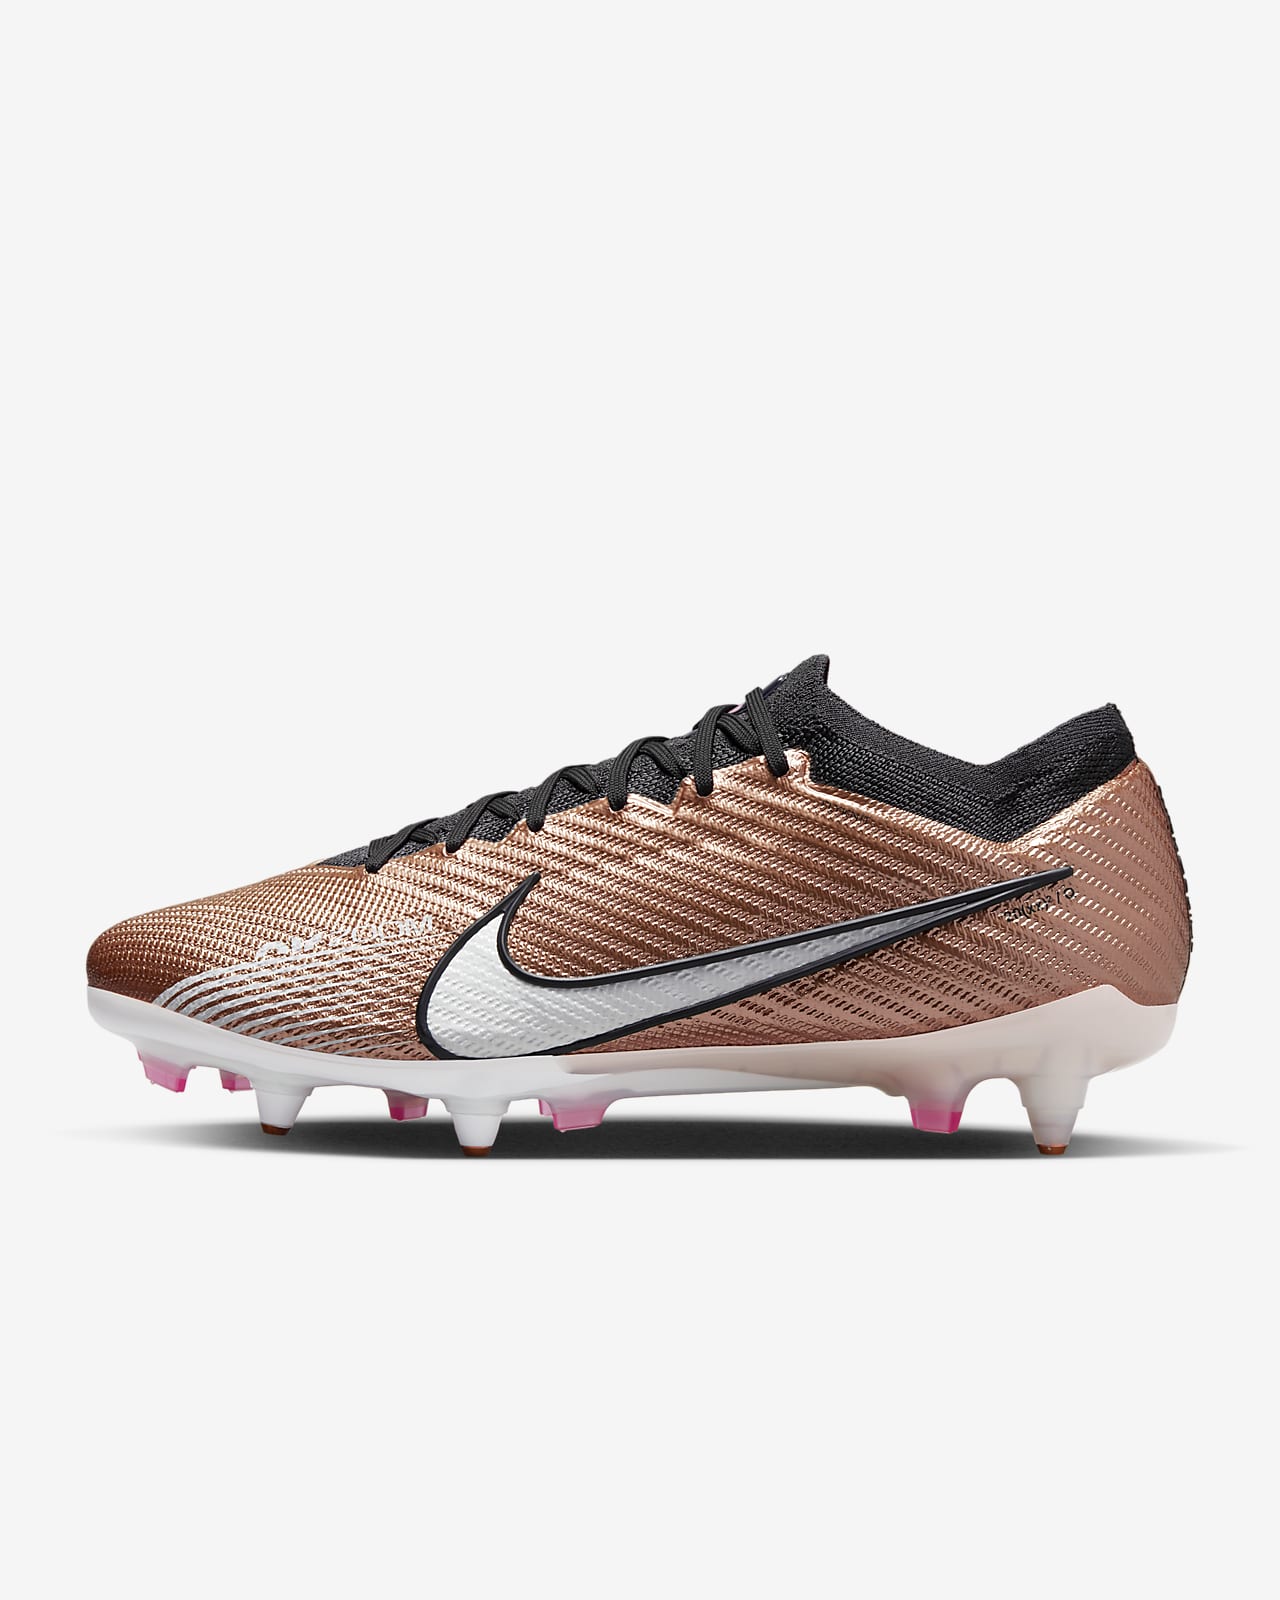 Nike Zoom Mercurial Vapor 15 Elite SG-Pro Anti-Clog Traction Soft-Ground Football Boots